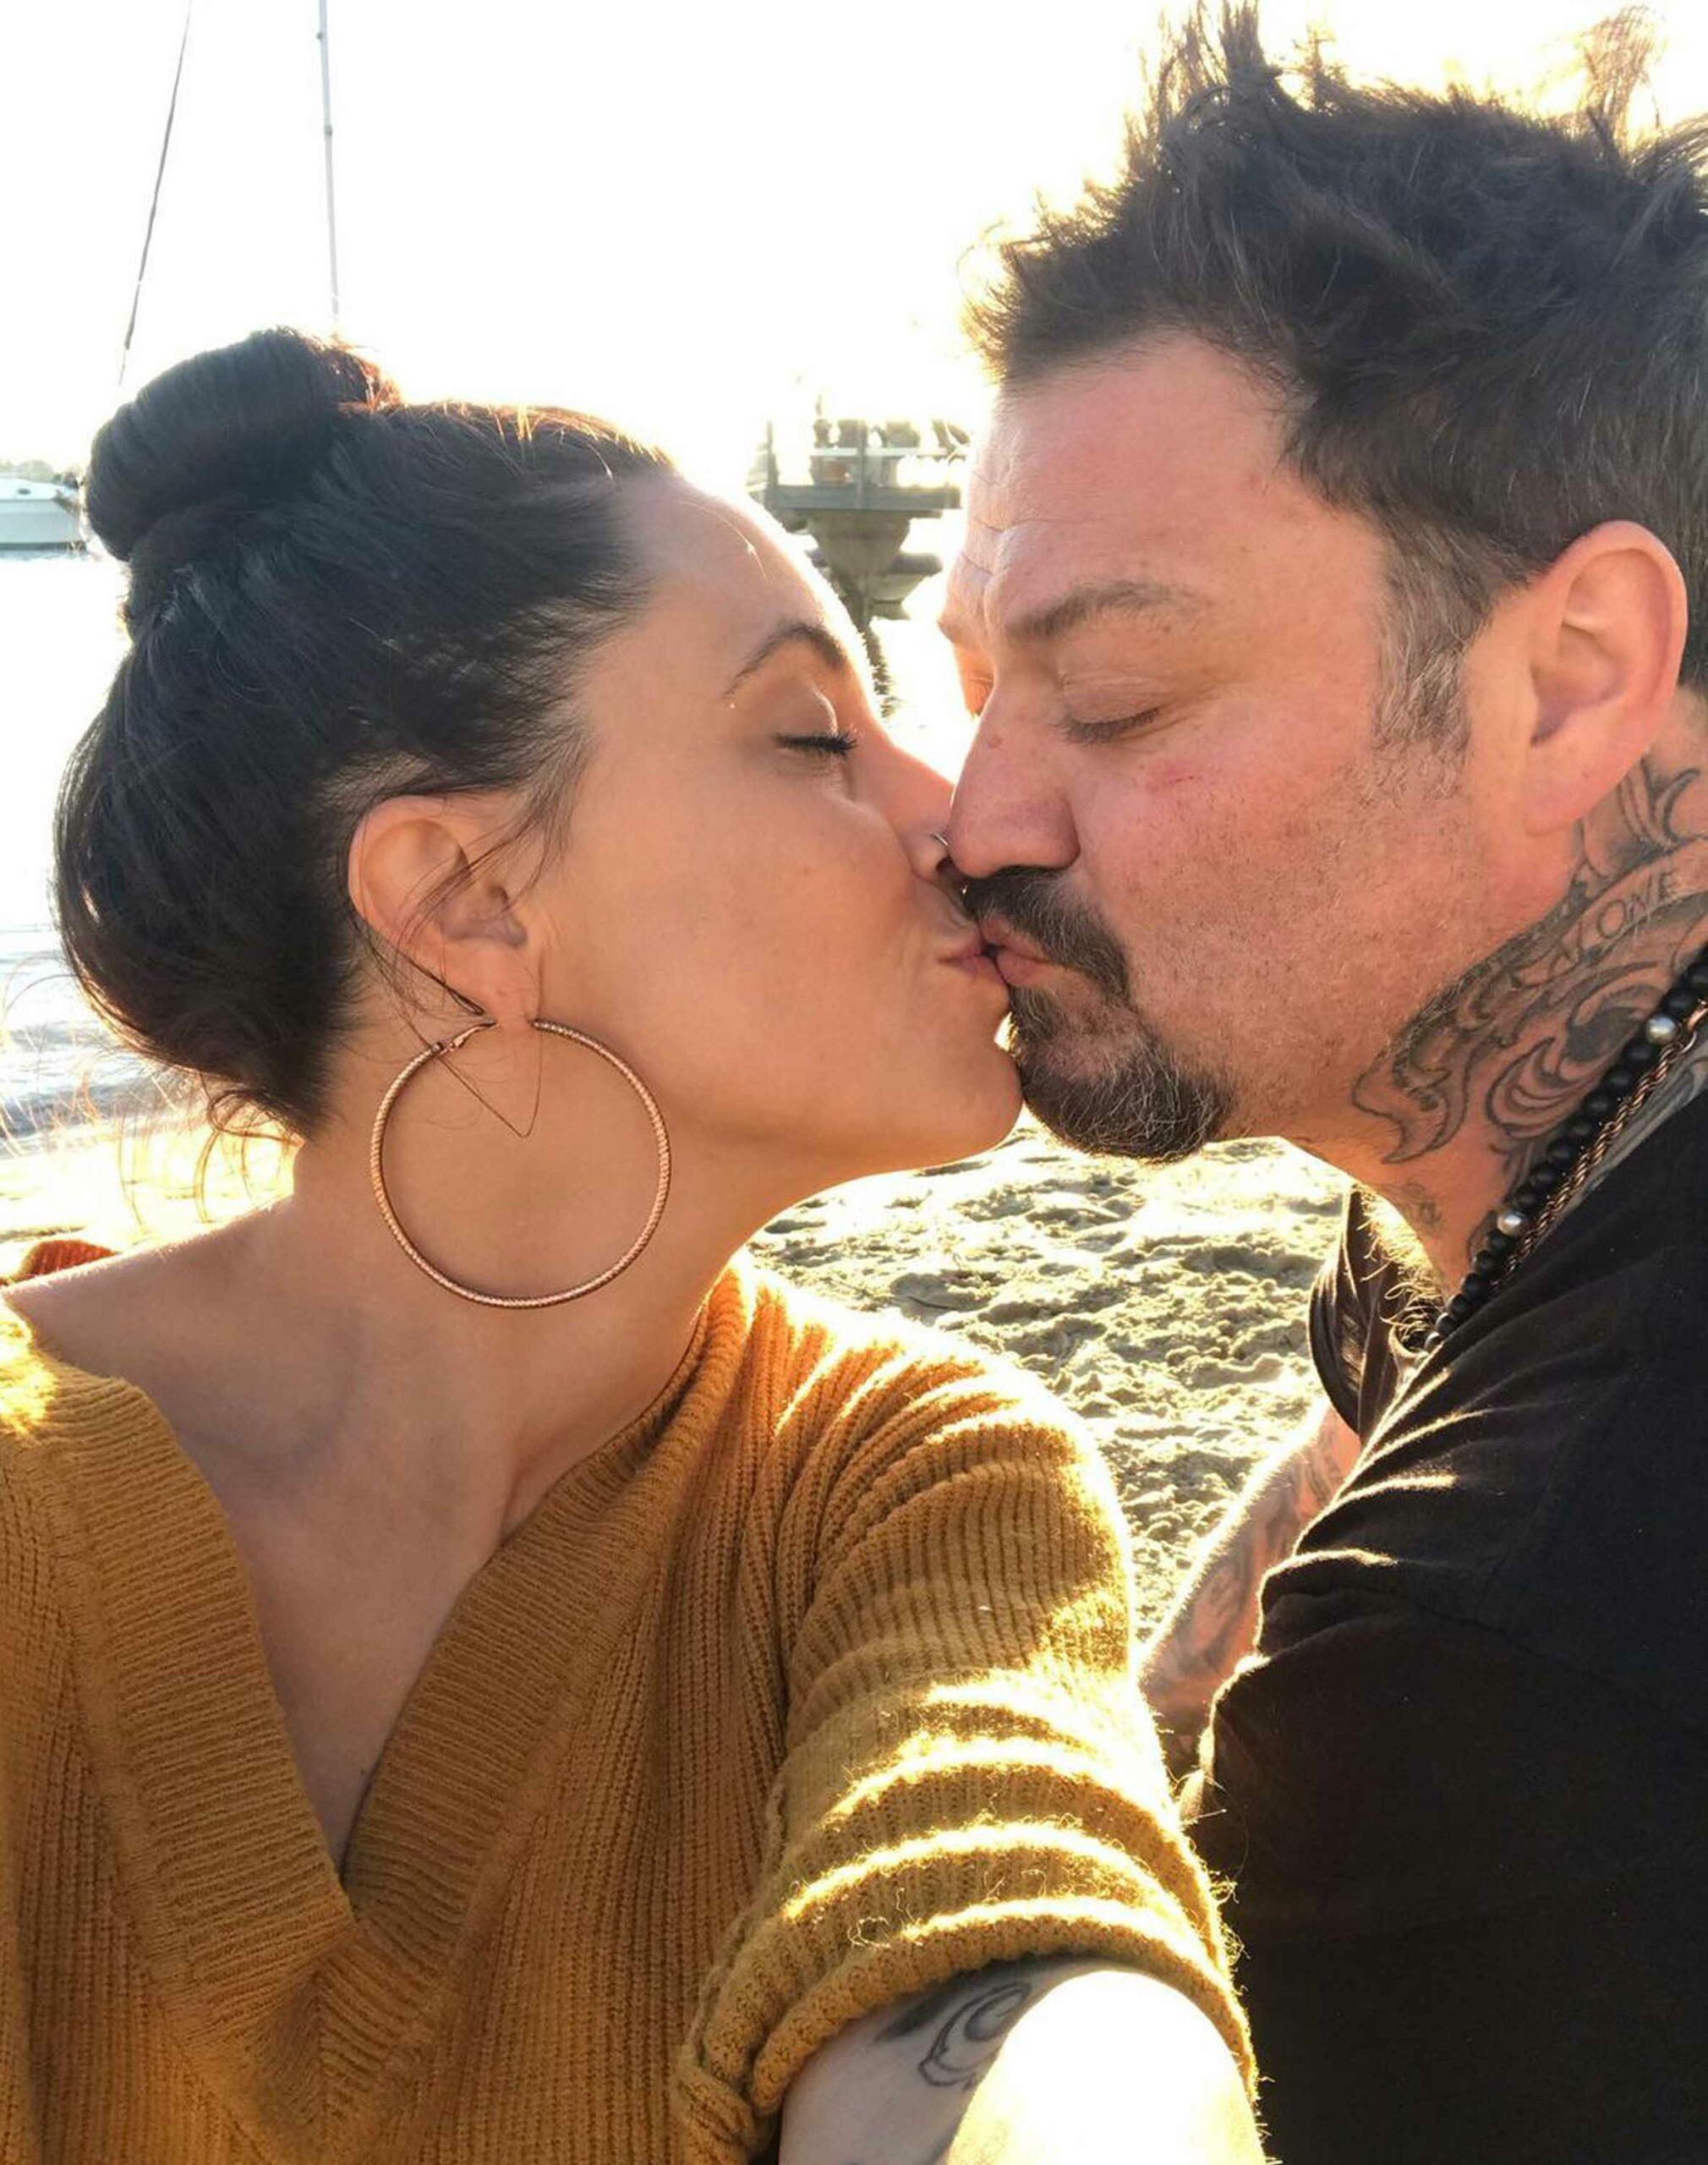 Bam Margera and his wife